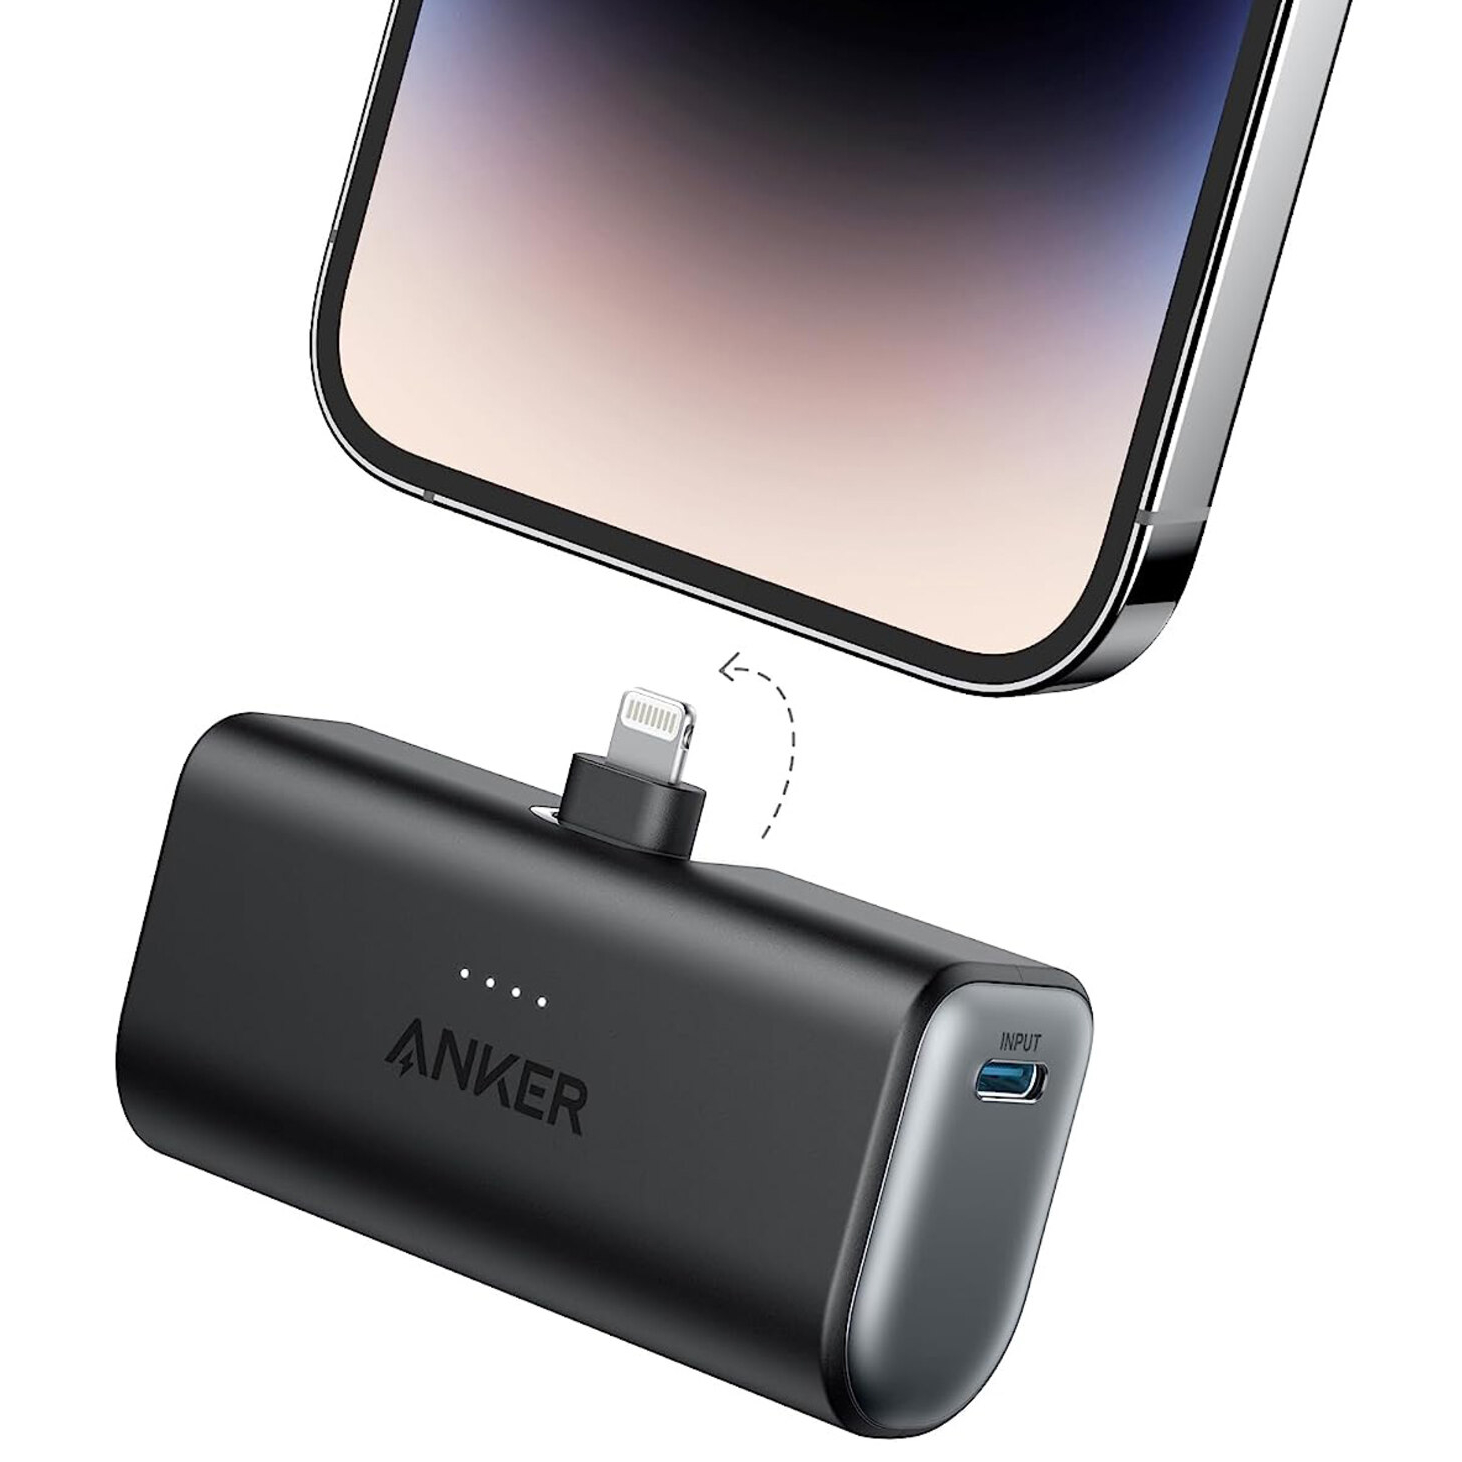 Anker Nano Power Bank with iPhone Input / Compatible with iPhones / 5000mAh  / Apple Certified in Qatar